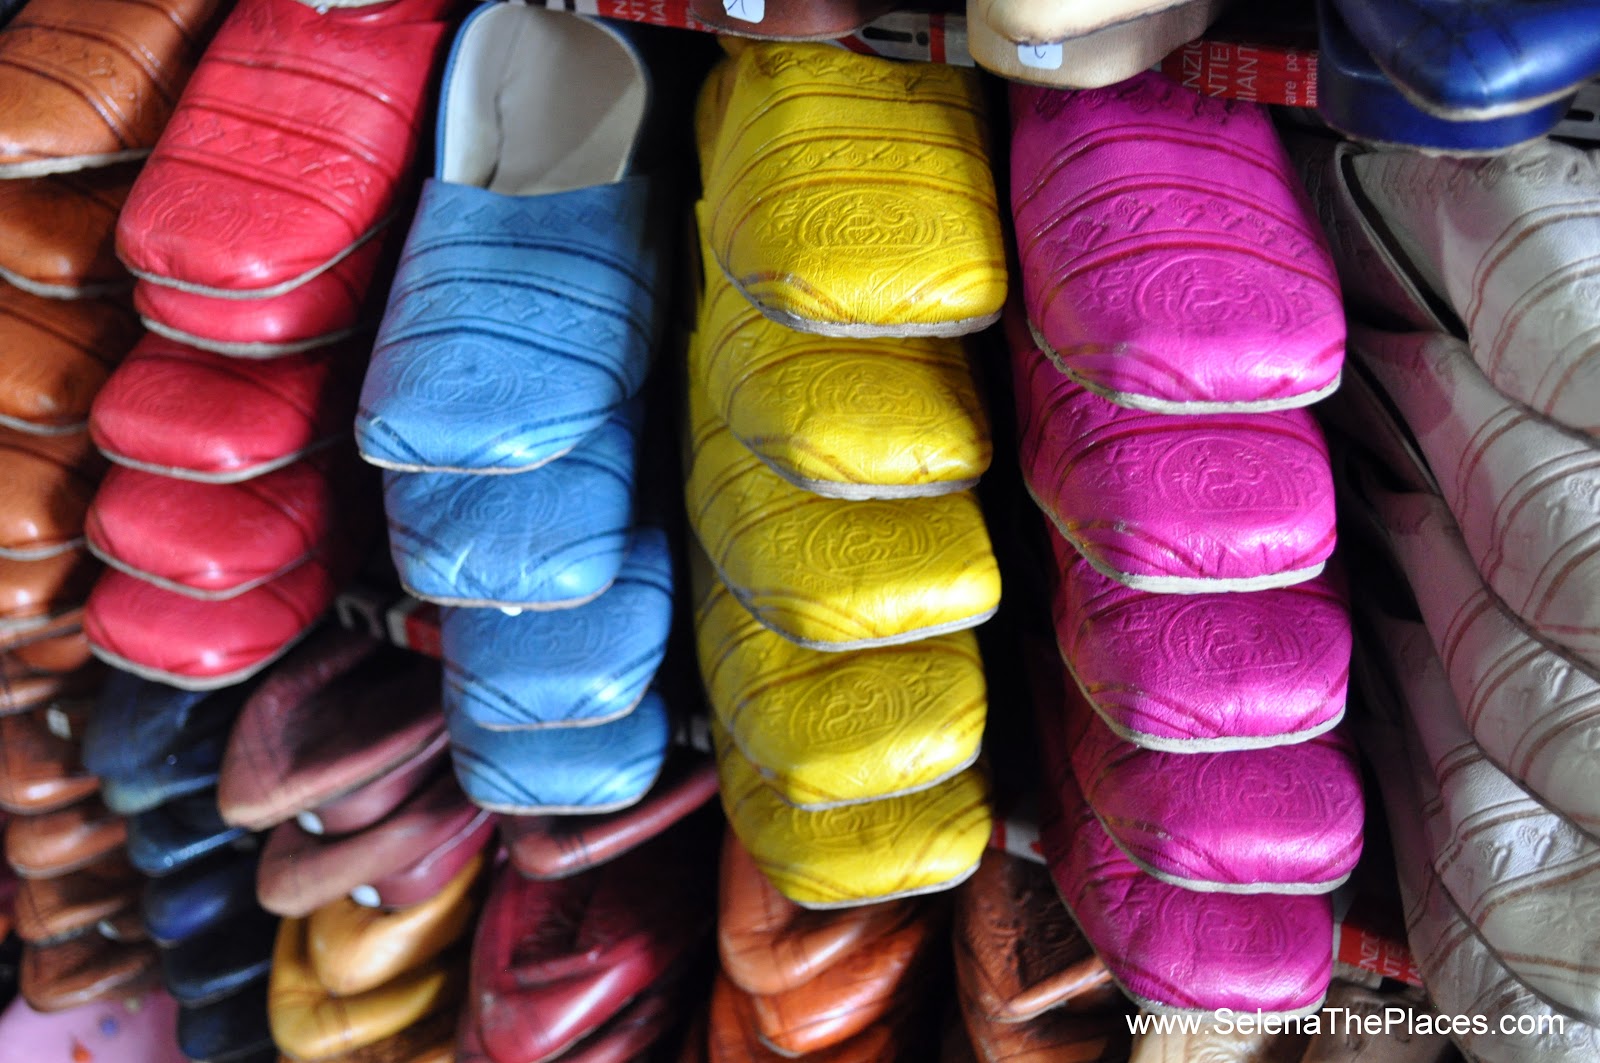 Shoes of Morocco